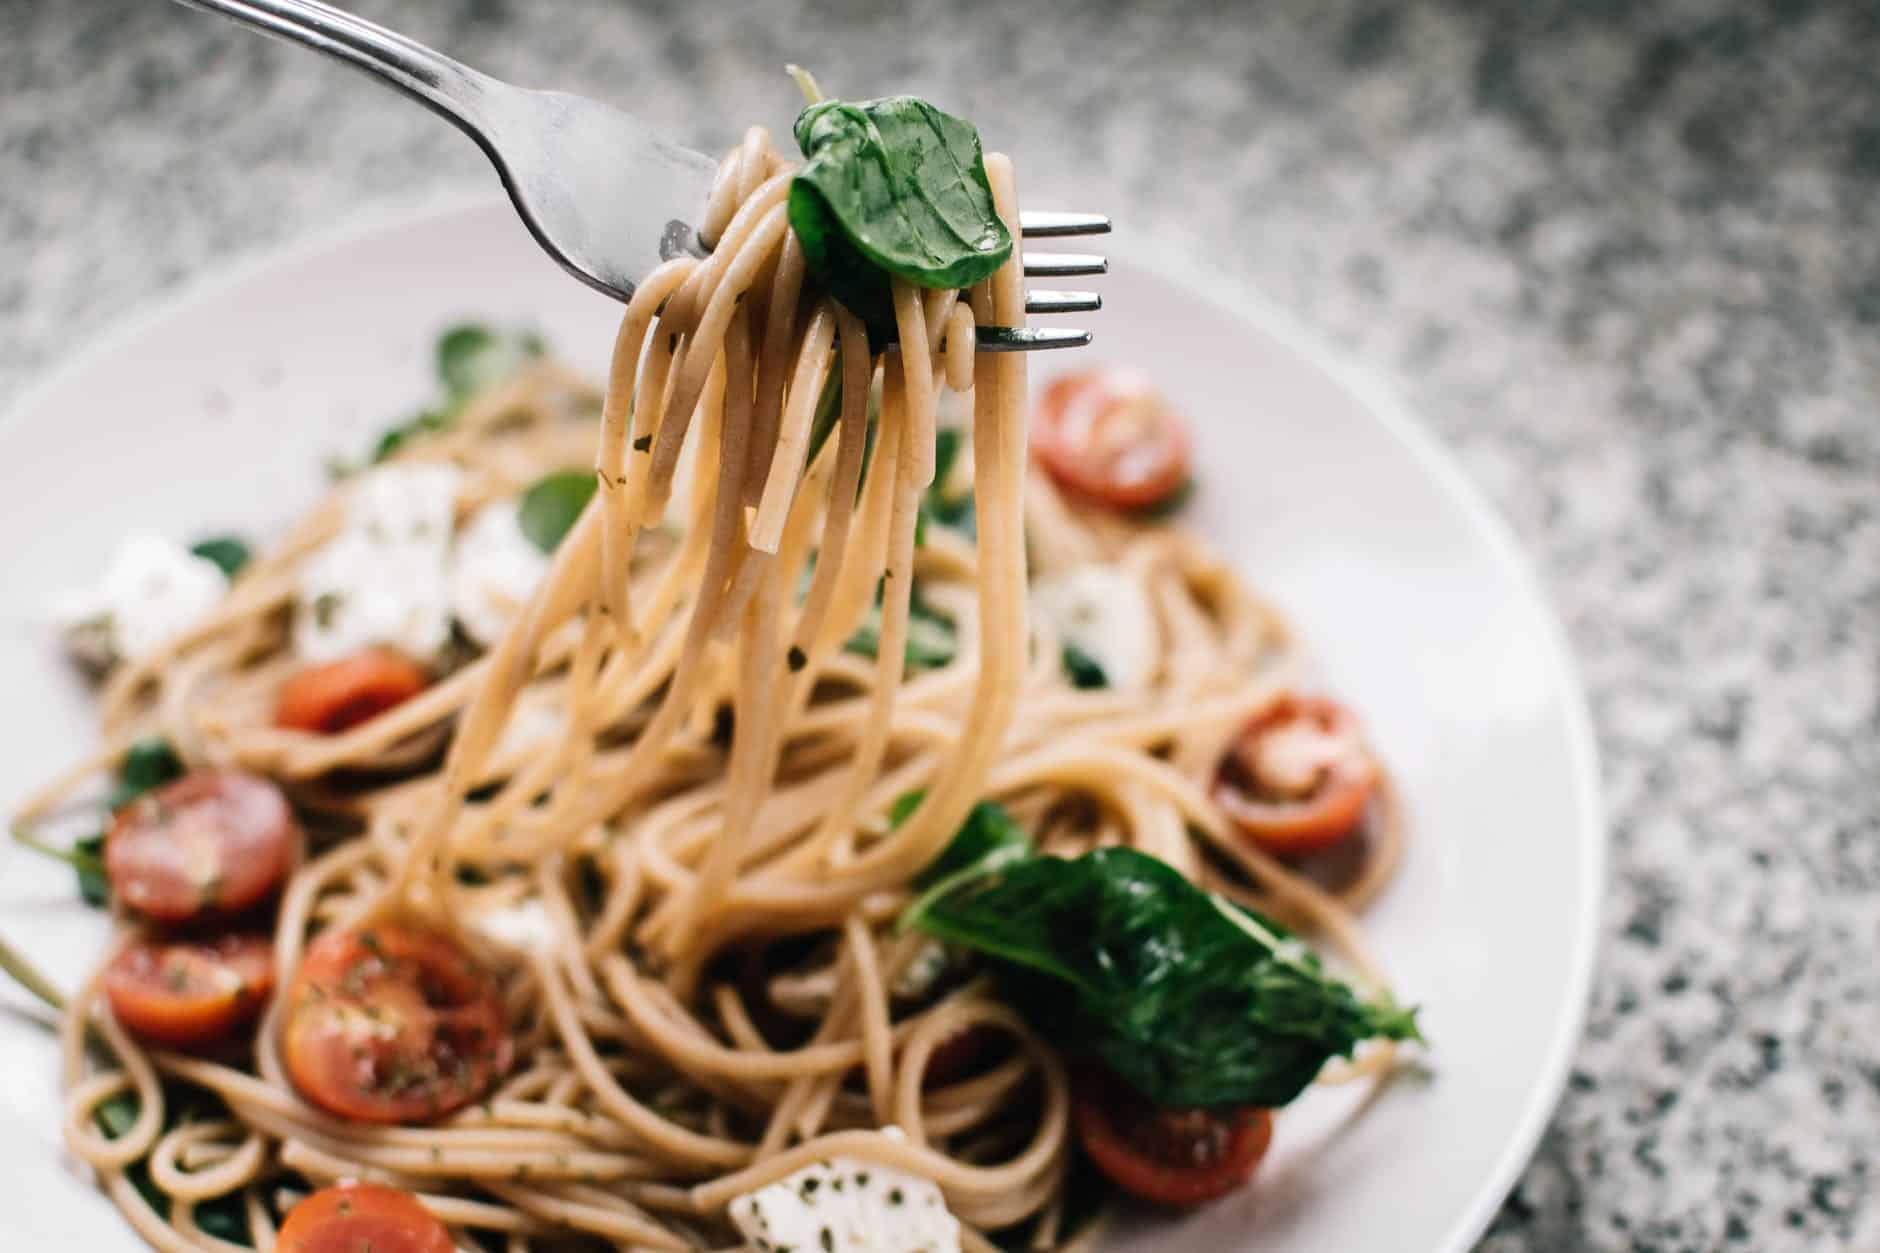 Photo by Lisa Fotios on <a href="https://www.pexels.com/photo/selective-focus-photography-of-pasta-with-tomato-and-basil-1279330/" rel="nofollow">Pexels.com</a>